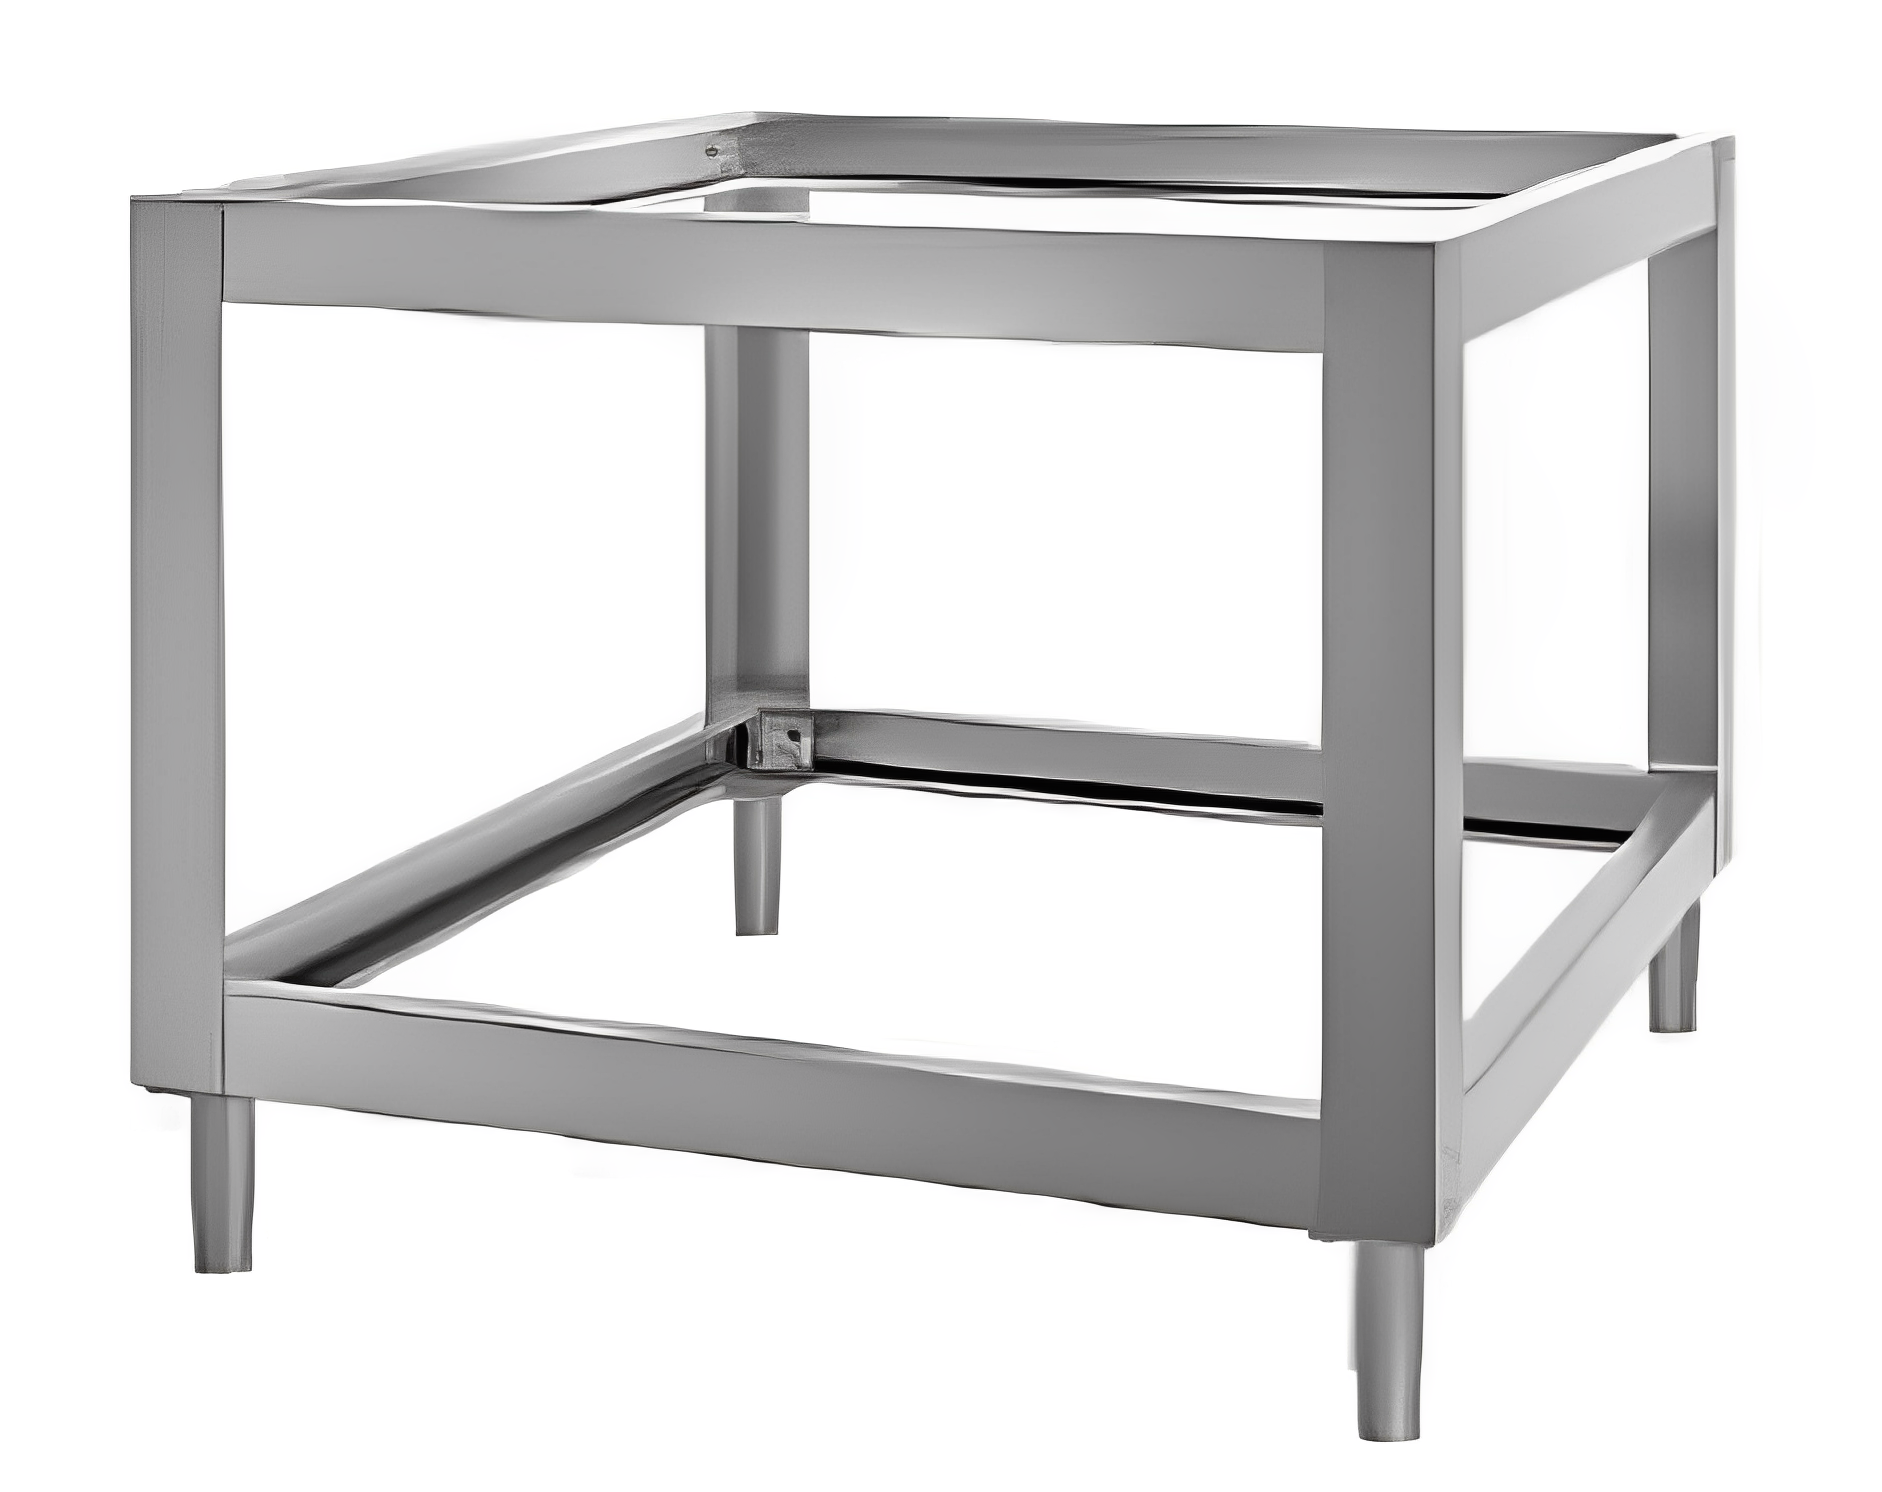 PIZZAGROUP Entry Max S12L Stands in stainless steel